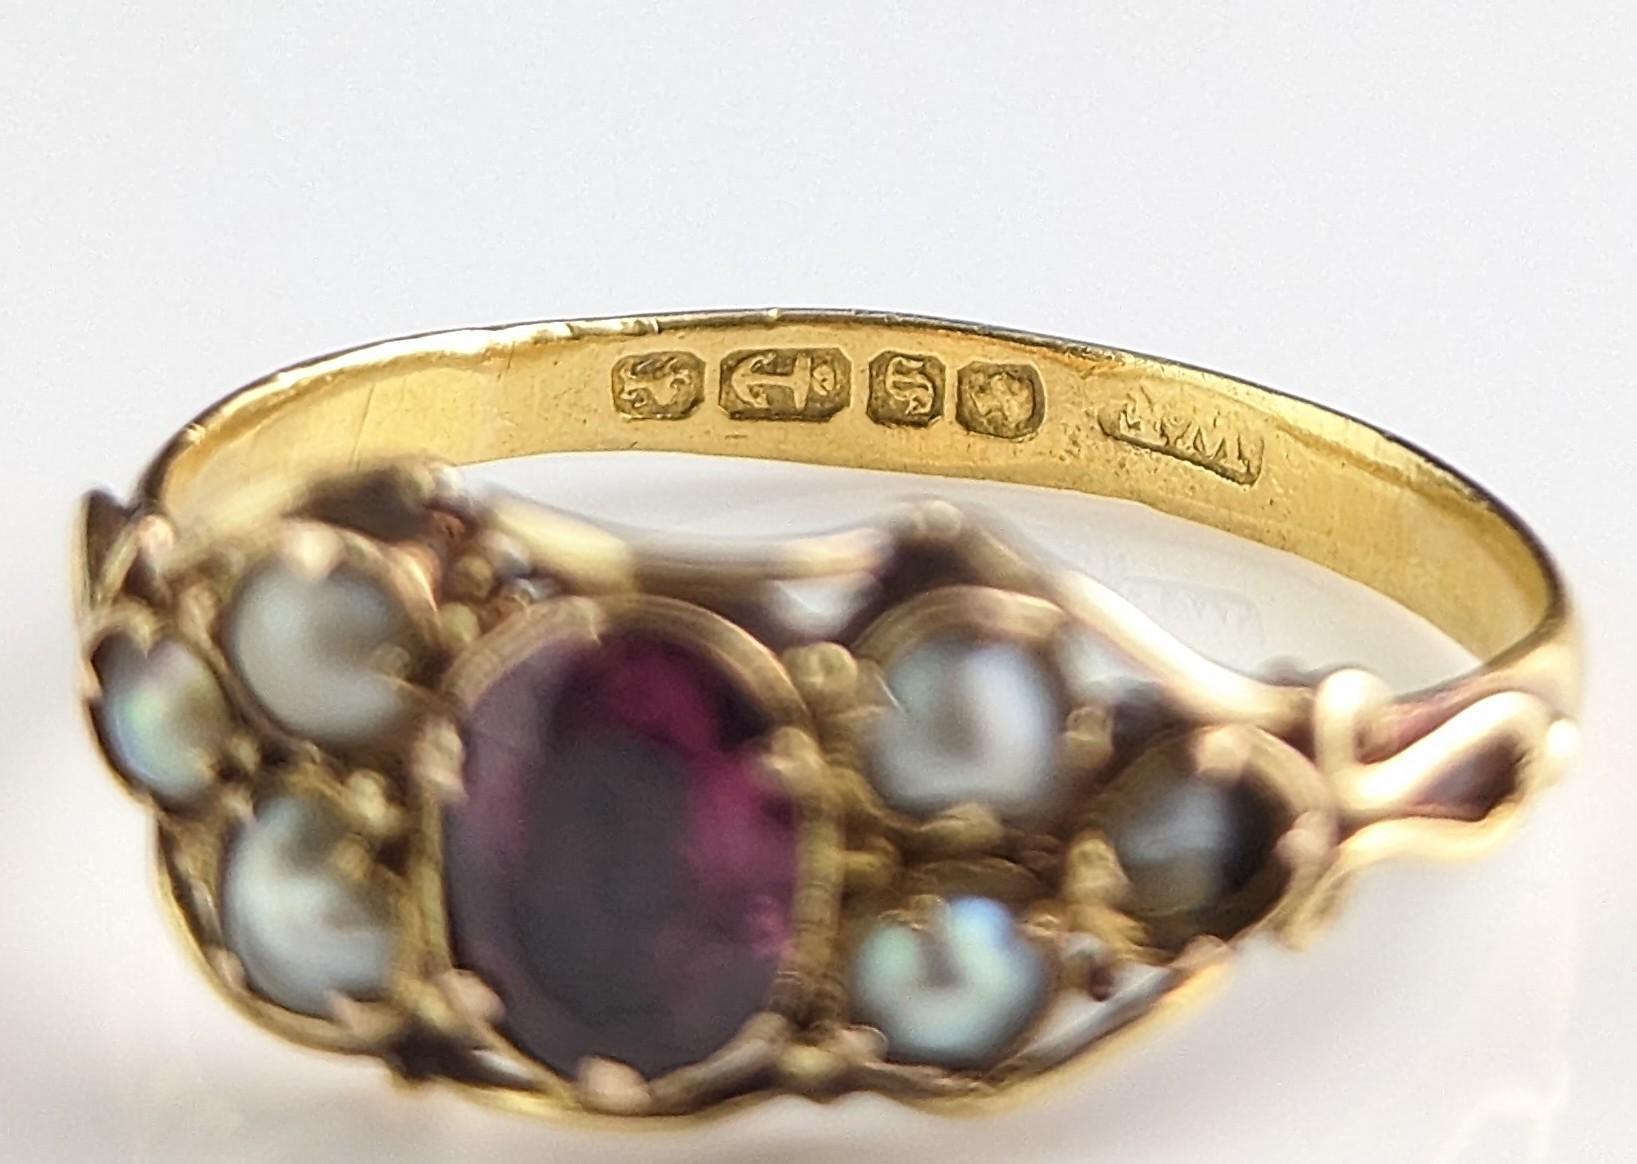 Antique Almandine Garnet and Pearl Ring, 22k Yellow Gold 7